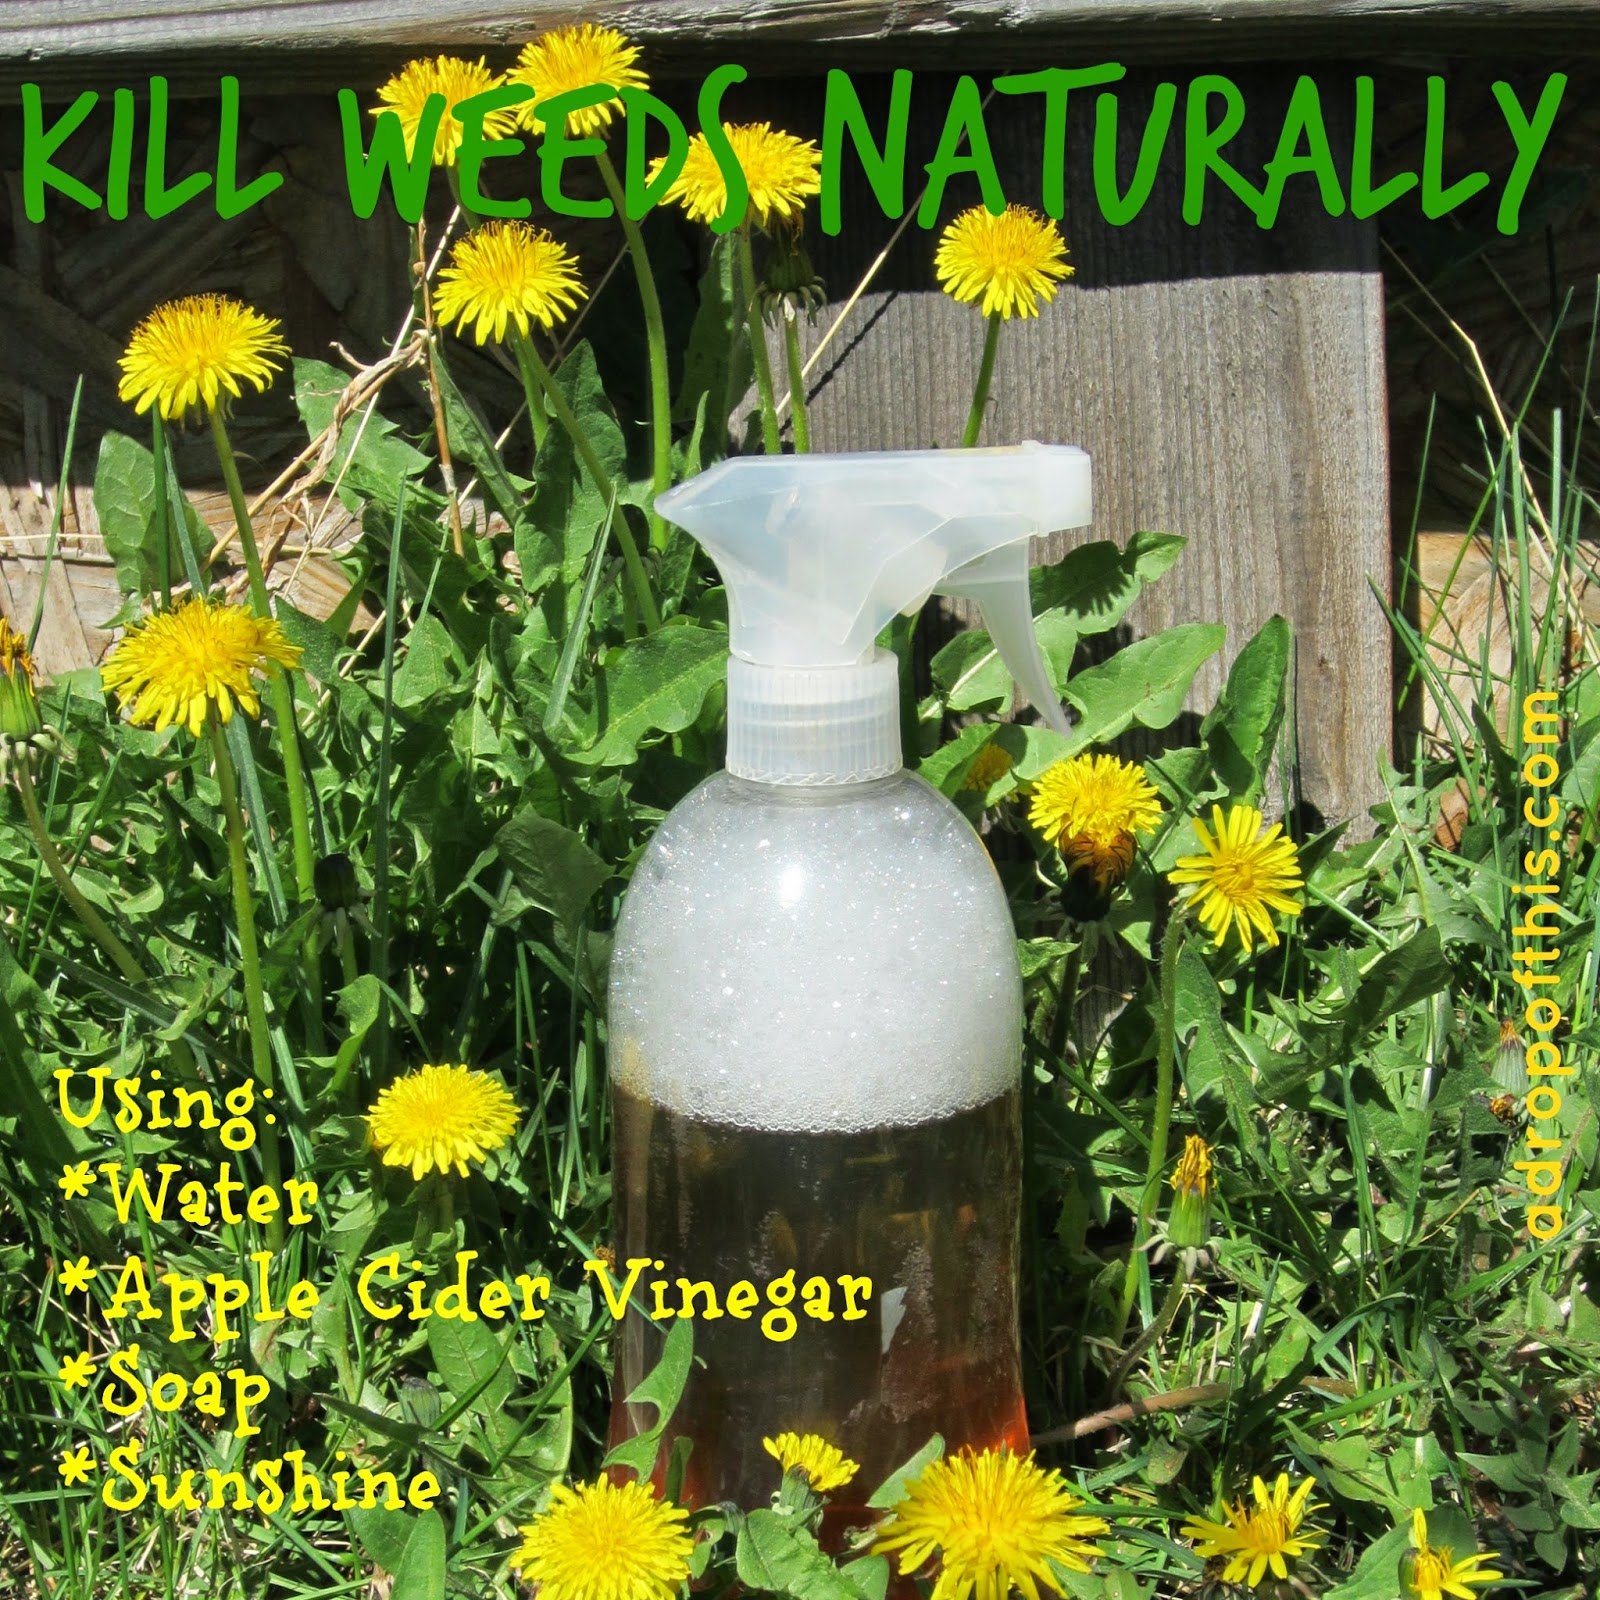 A Drop of This: Kill Weeds *Naturally*